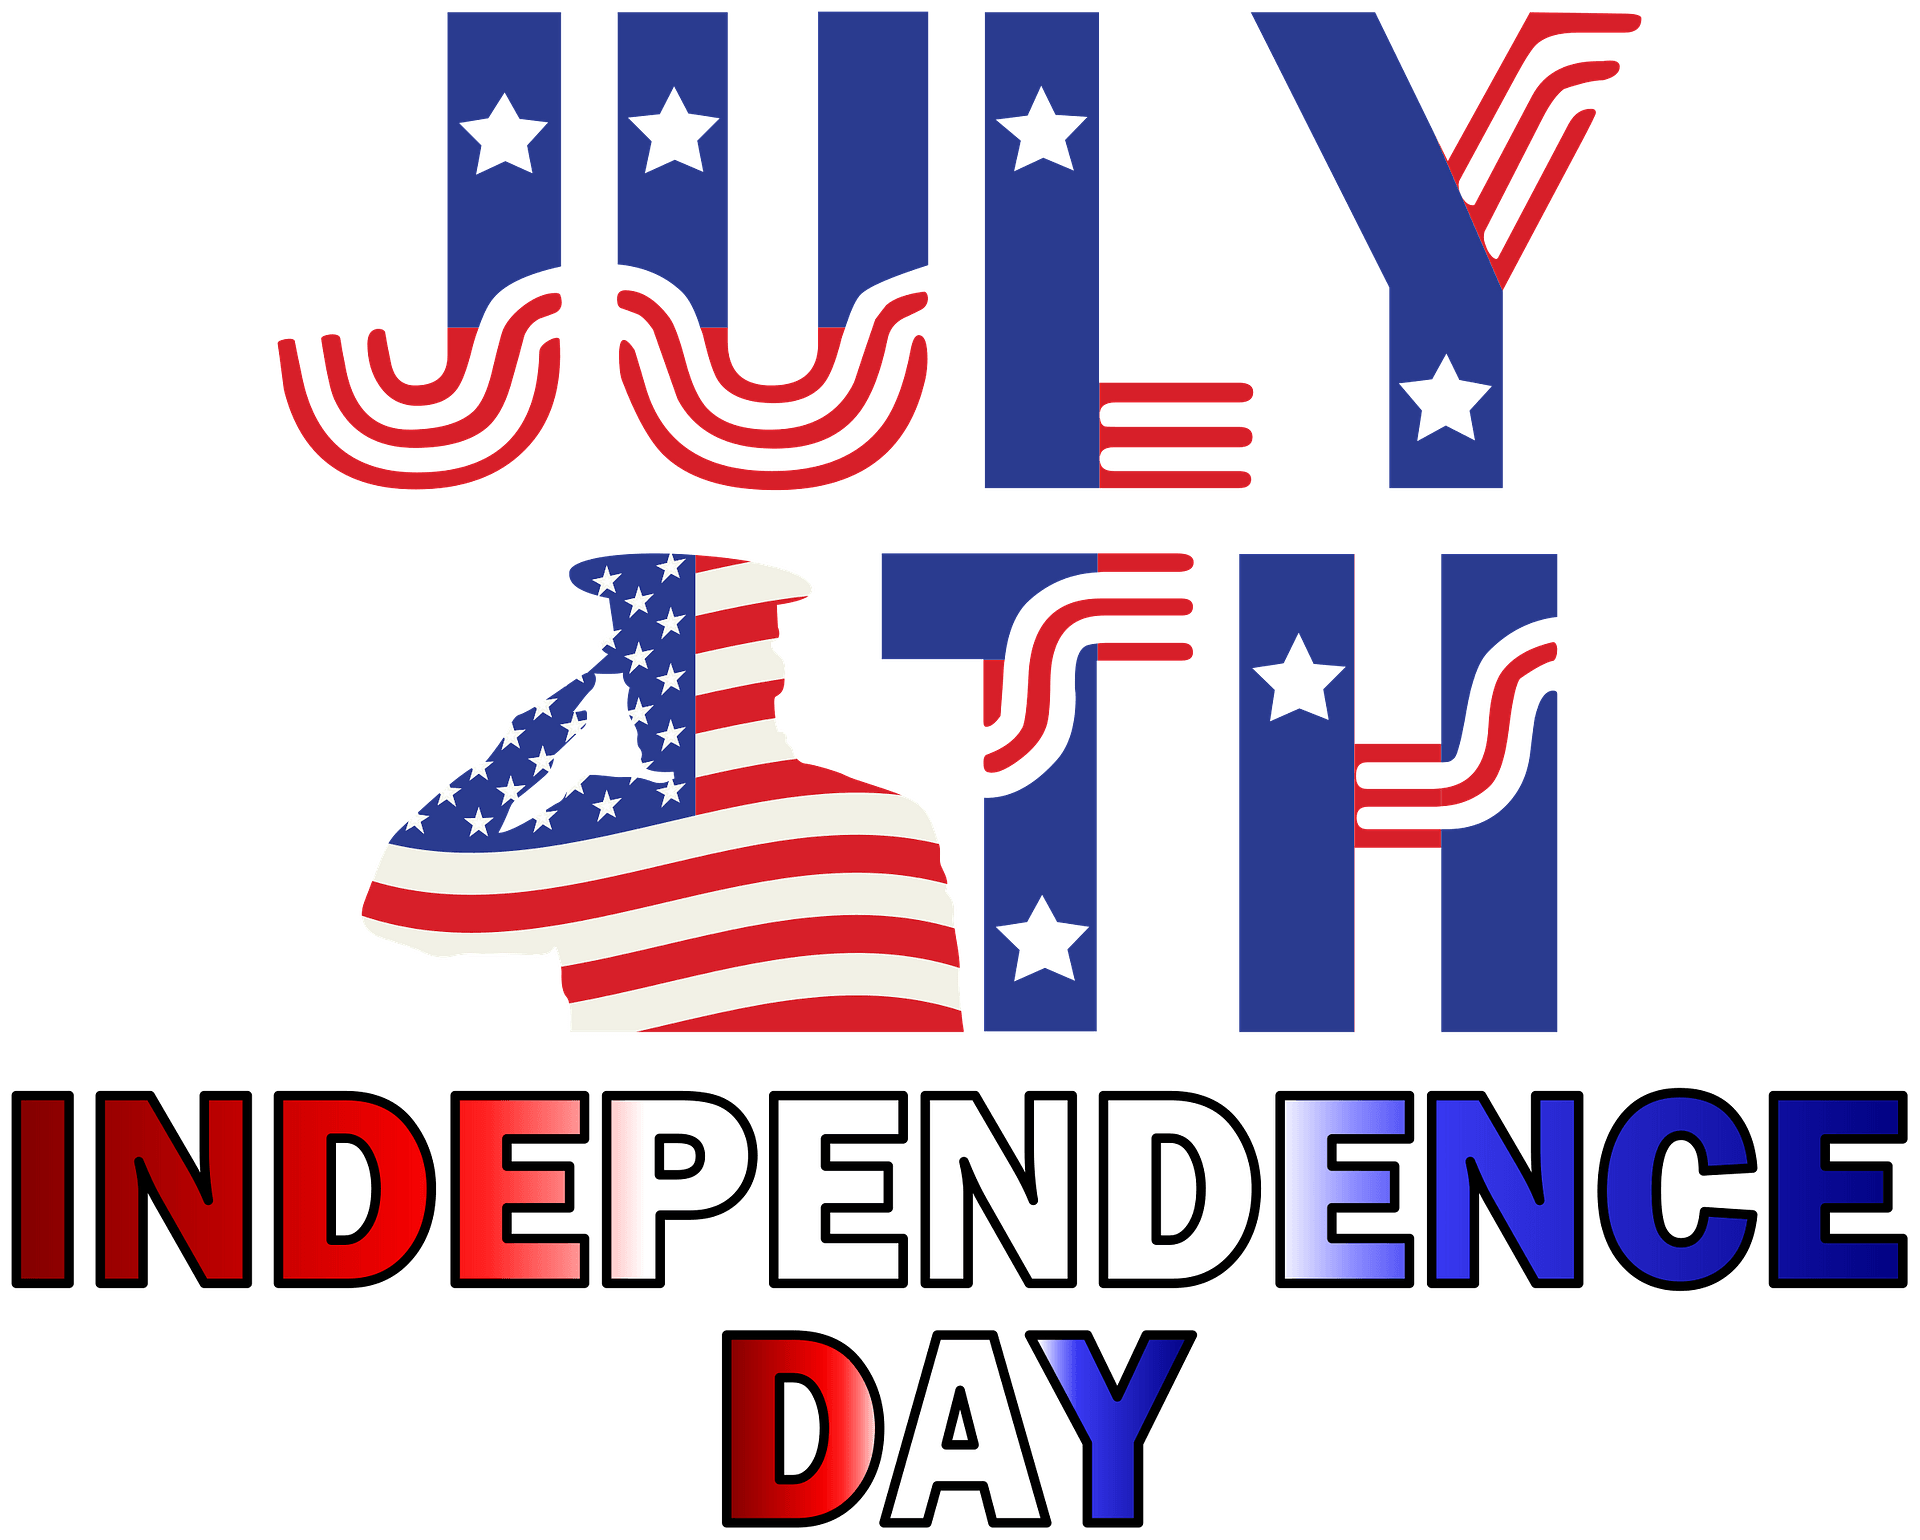 Clipart of July 4th Independence Day celebration.